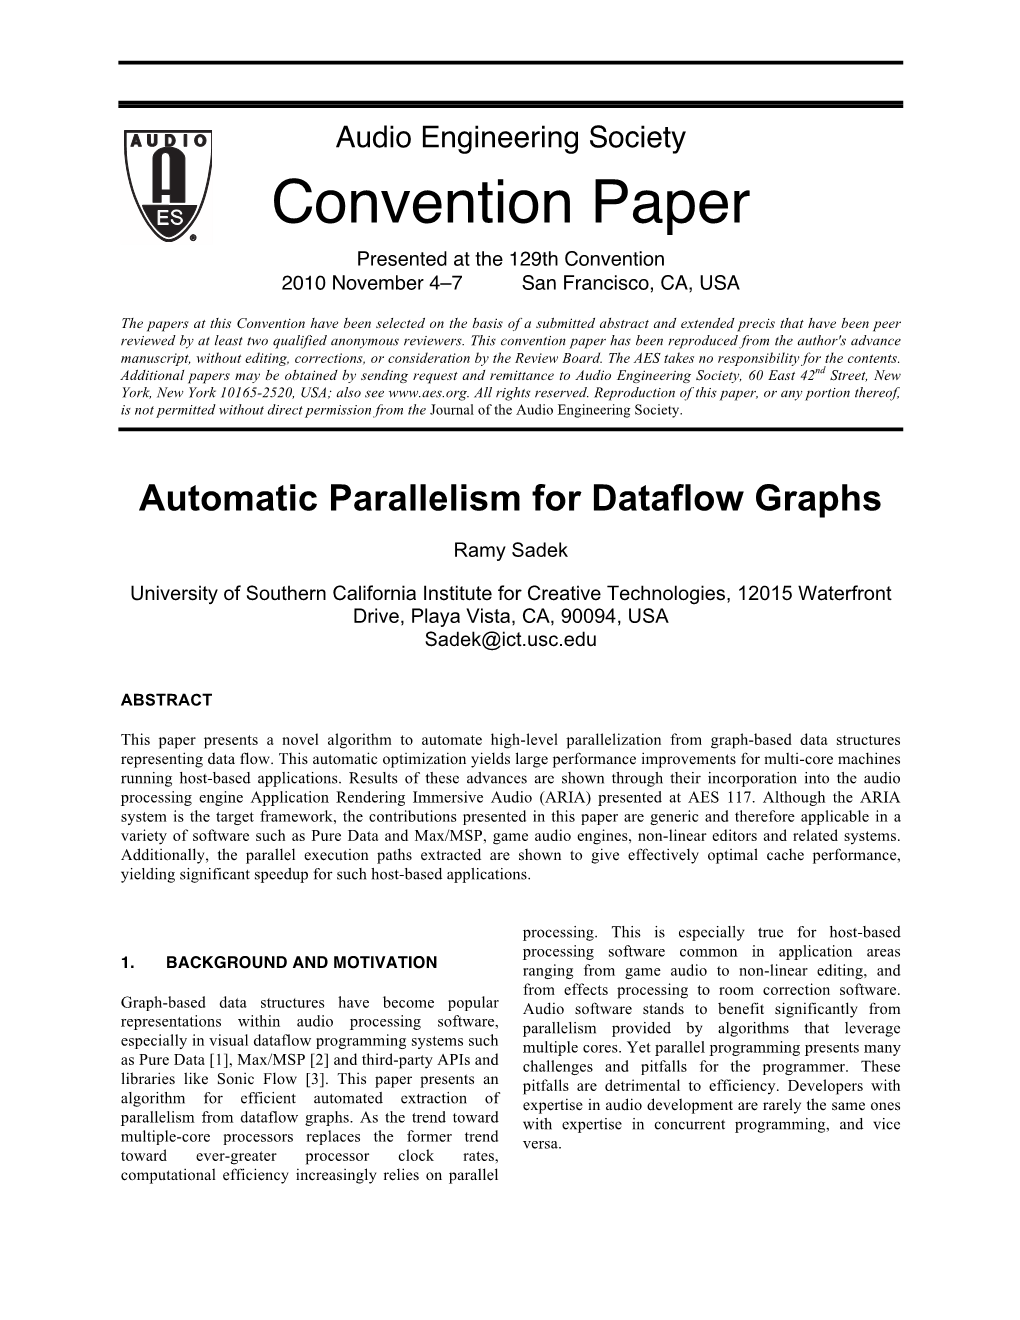 Automatic Parallelism for Dataflow Graphs